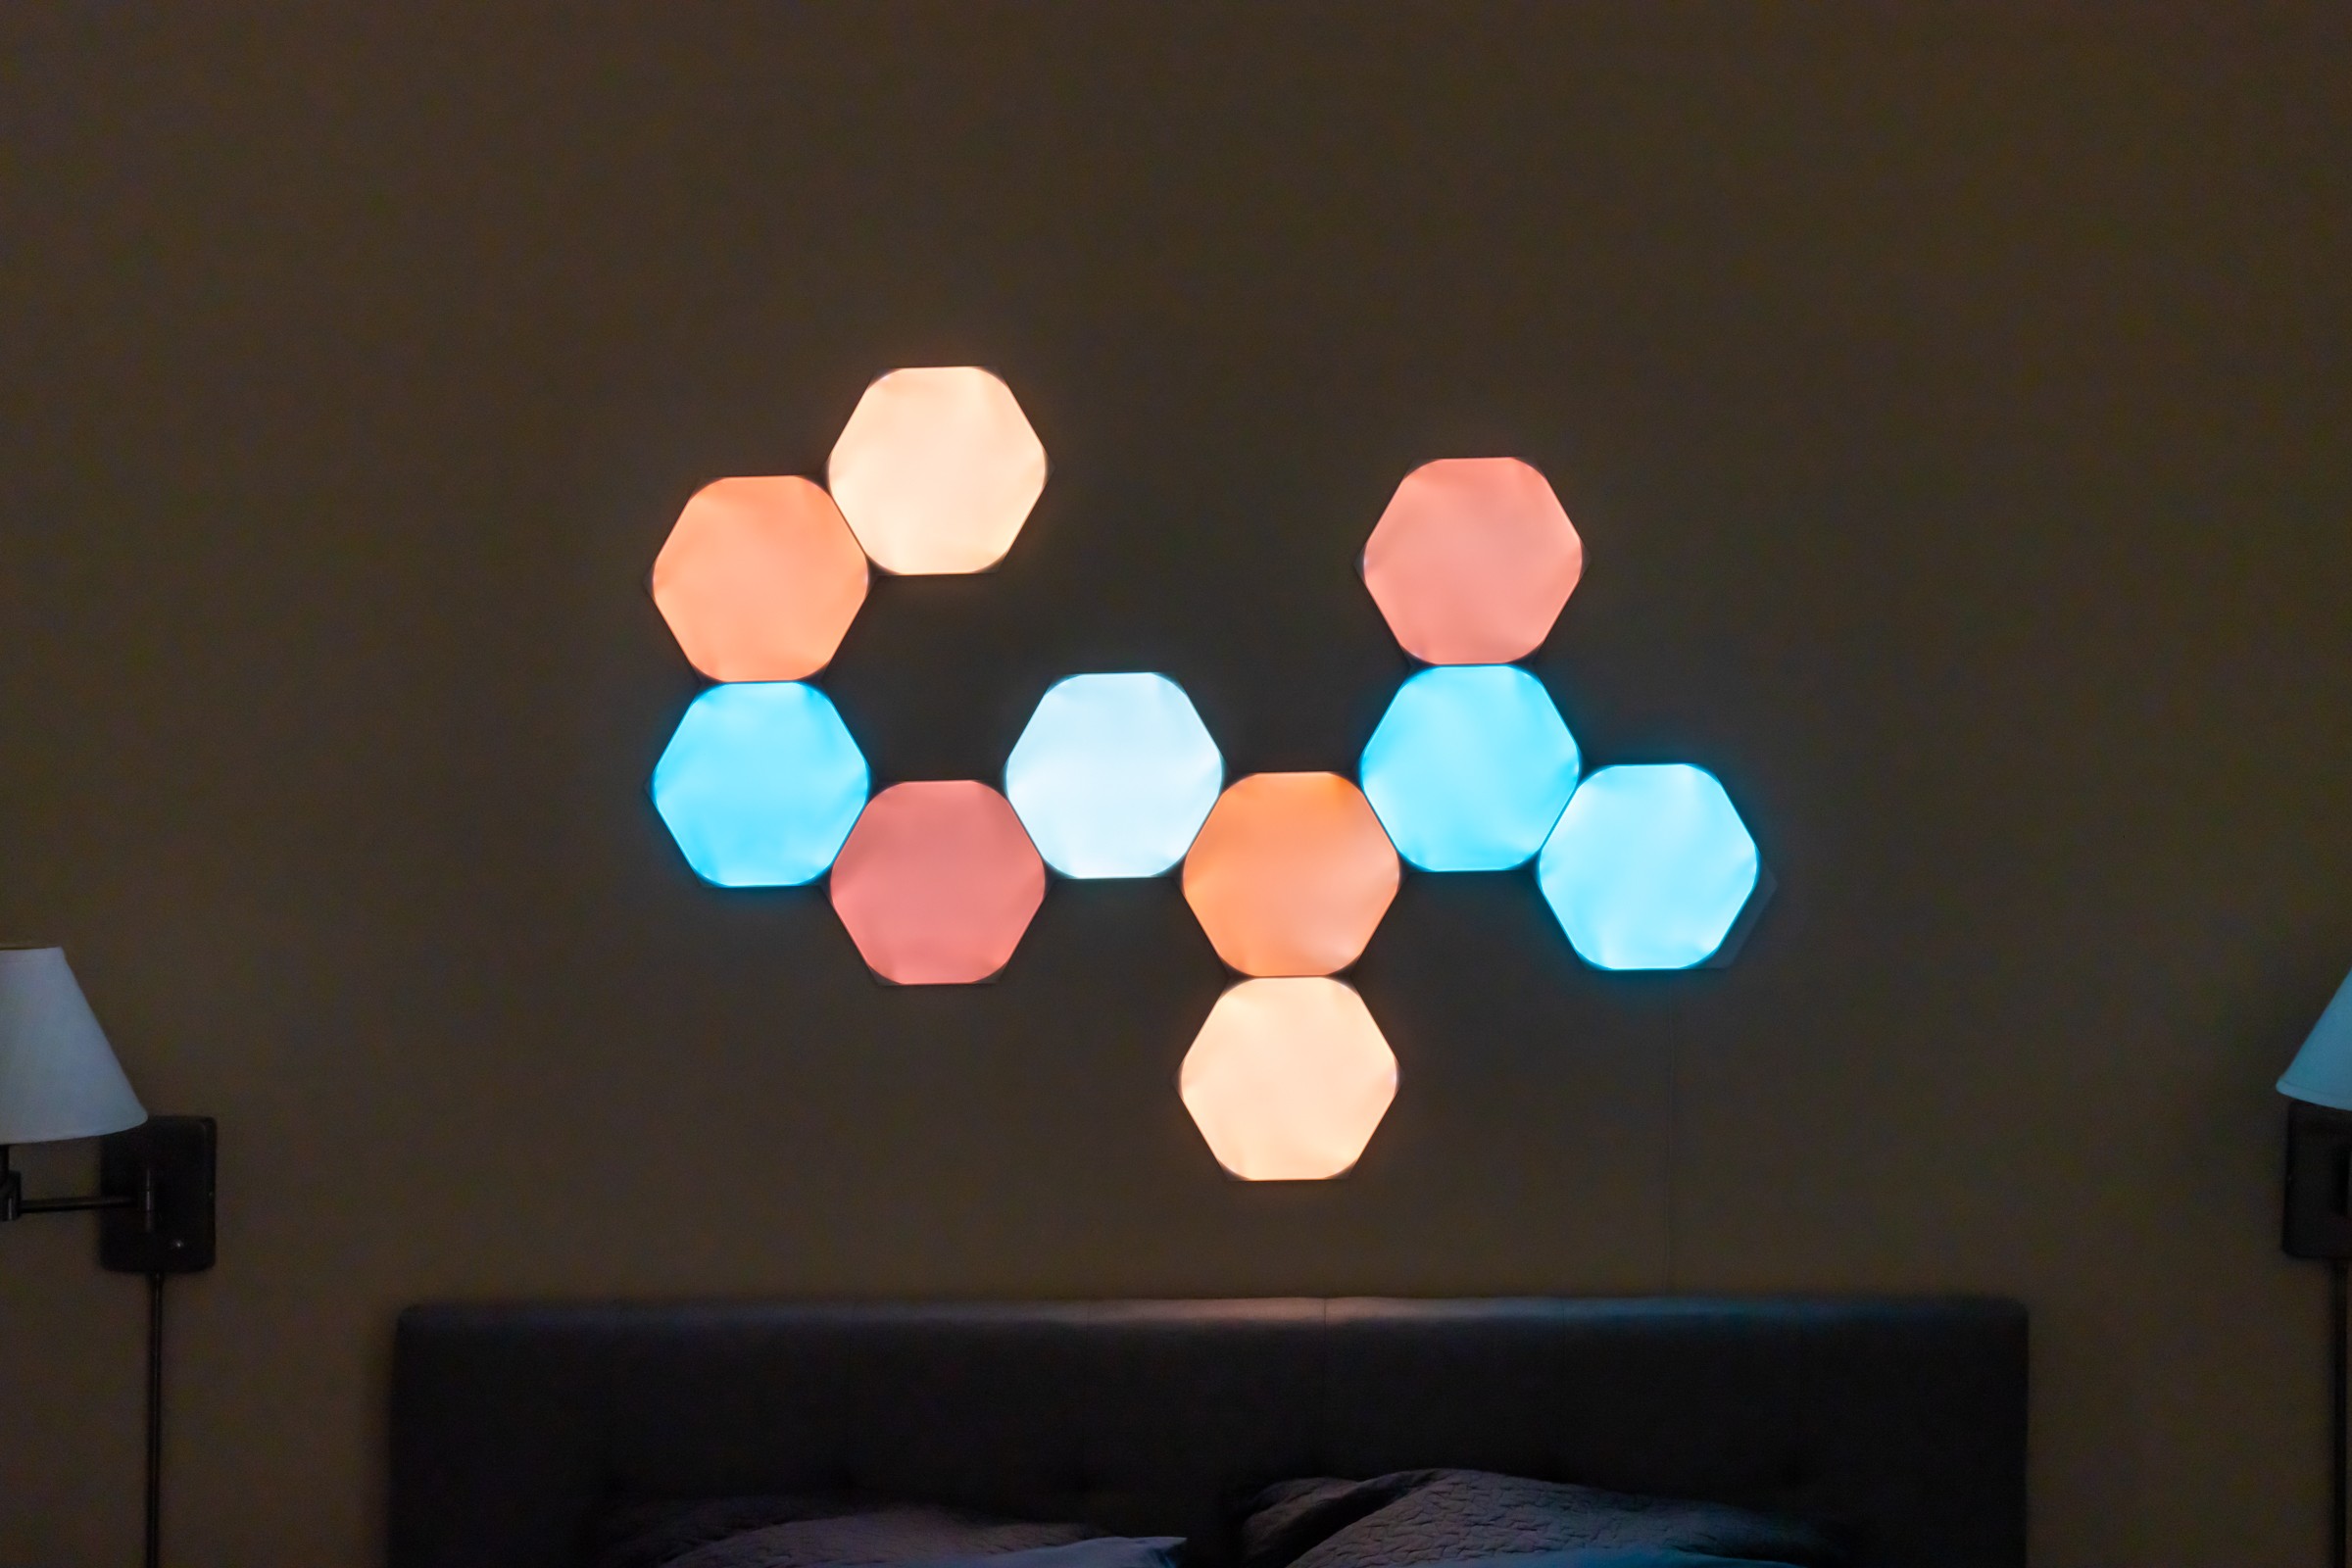 Nanoleaf’s new Hexagon Shapes are a surprisingly lively and organic addition to your home decor